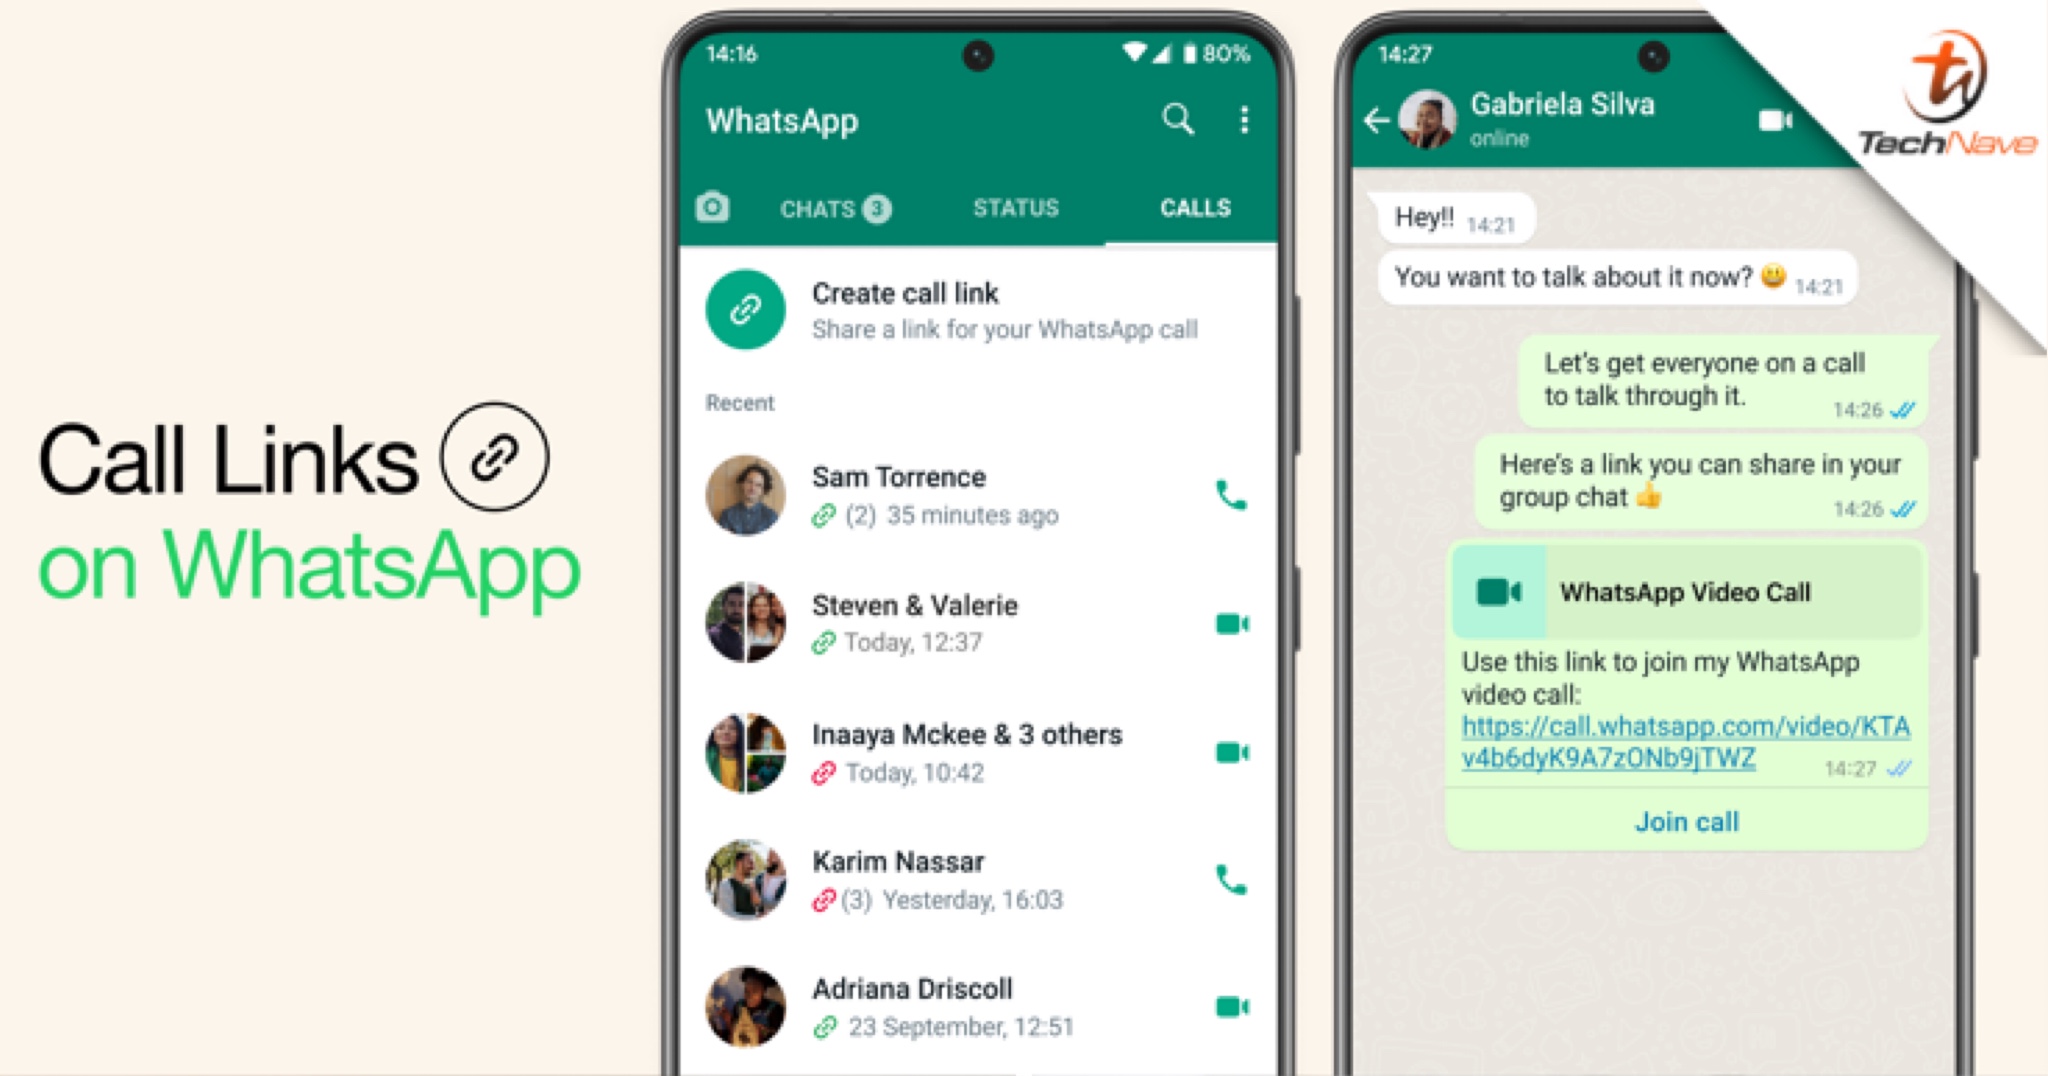 WhatsApp now has quick links for calls, to support secure encrypted video calling for up to 32 people soon